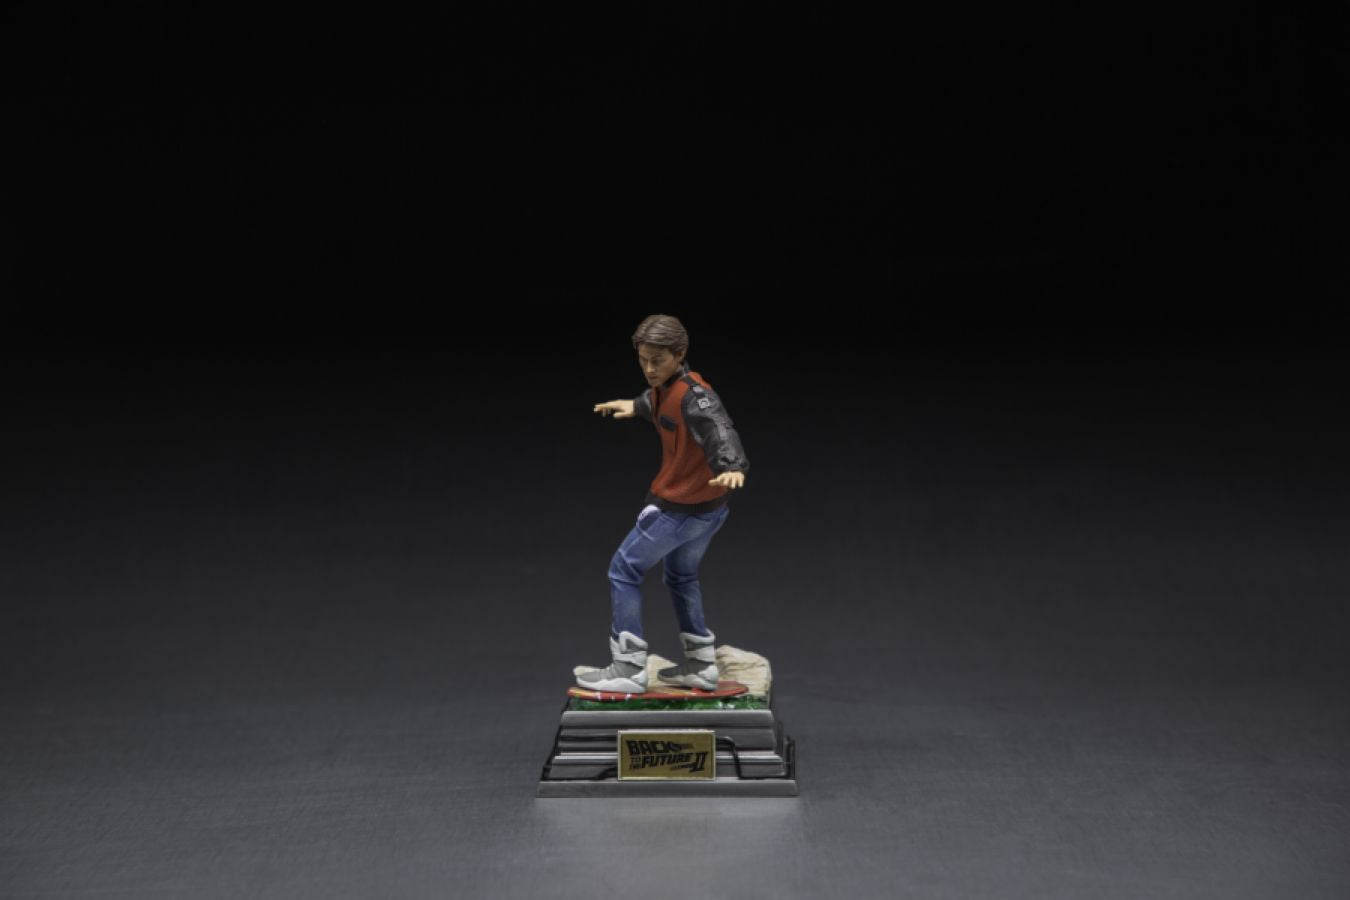 Back to the Future 2 - Marty on Hoverboard 1:10 Scale Statue